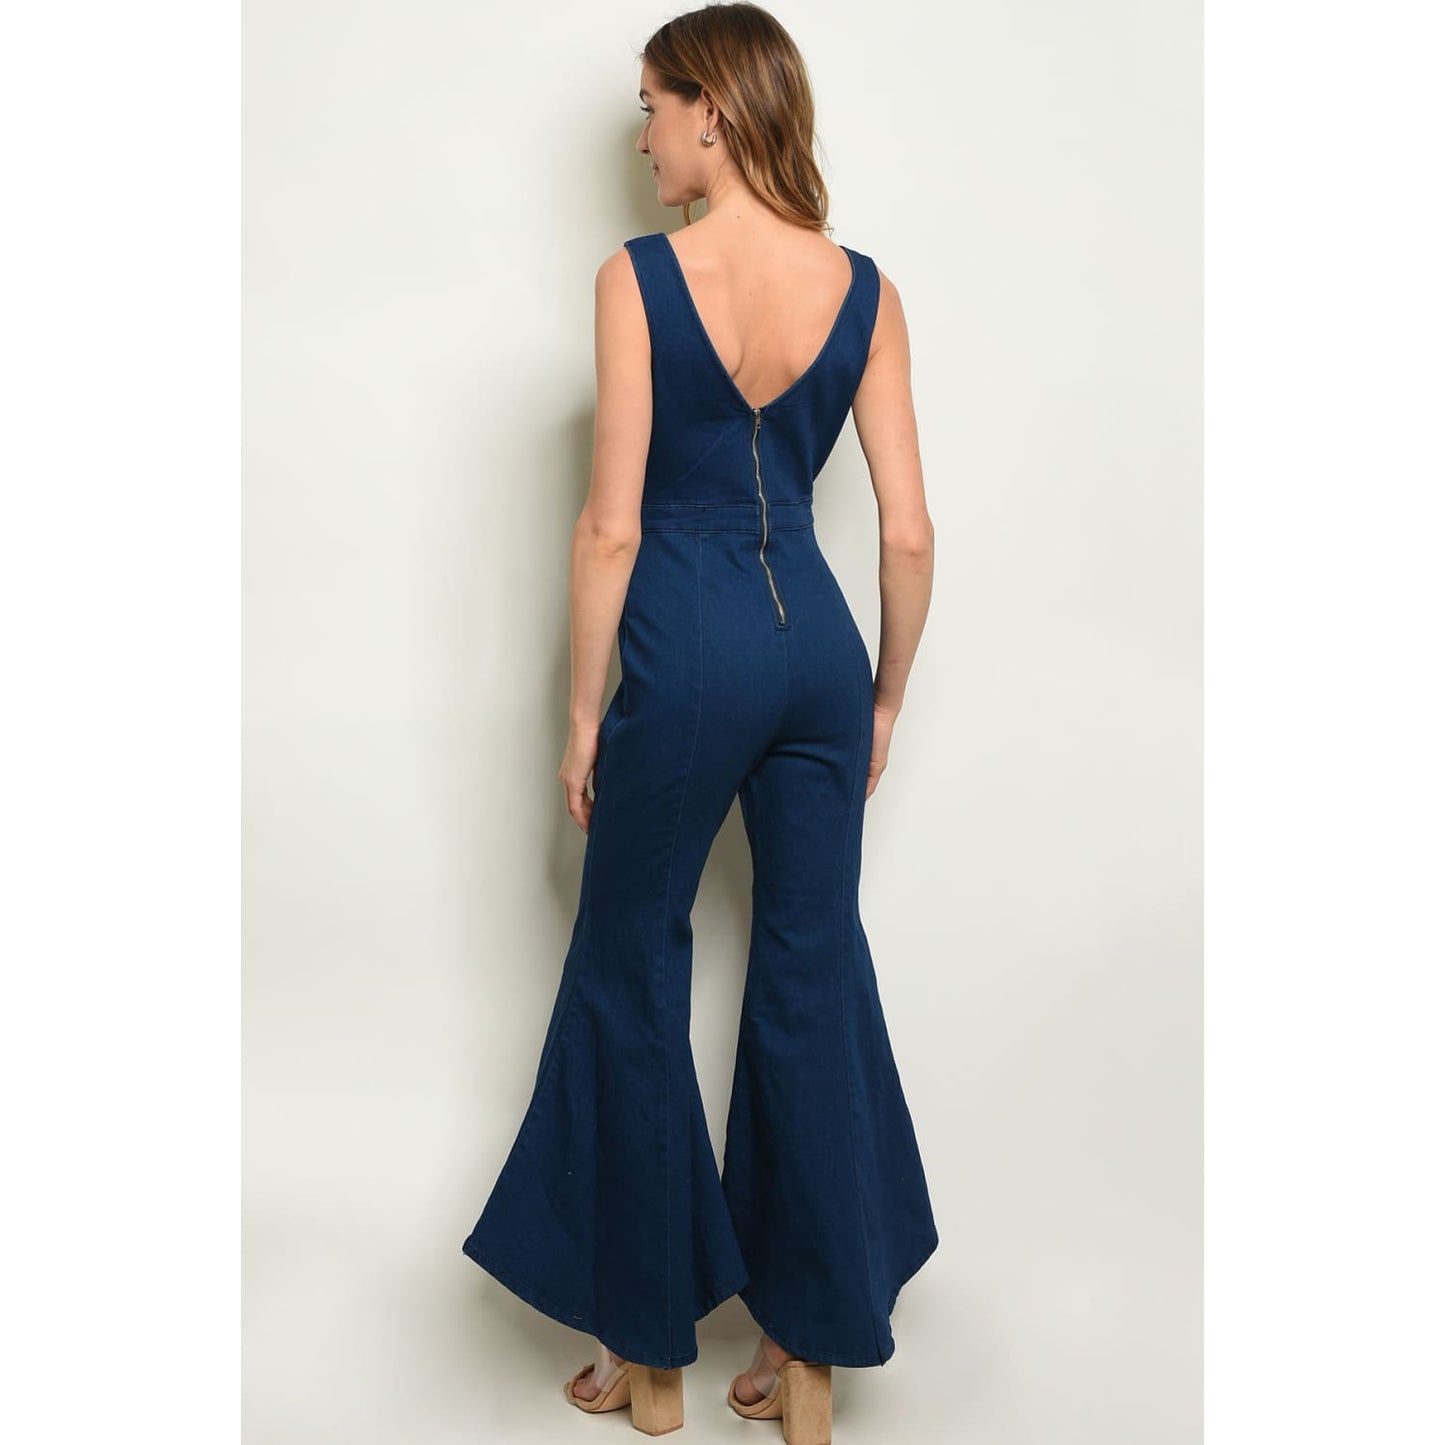 Denim Flare Bottom Jumpsuit - Best YOU by HTS